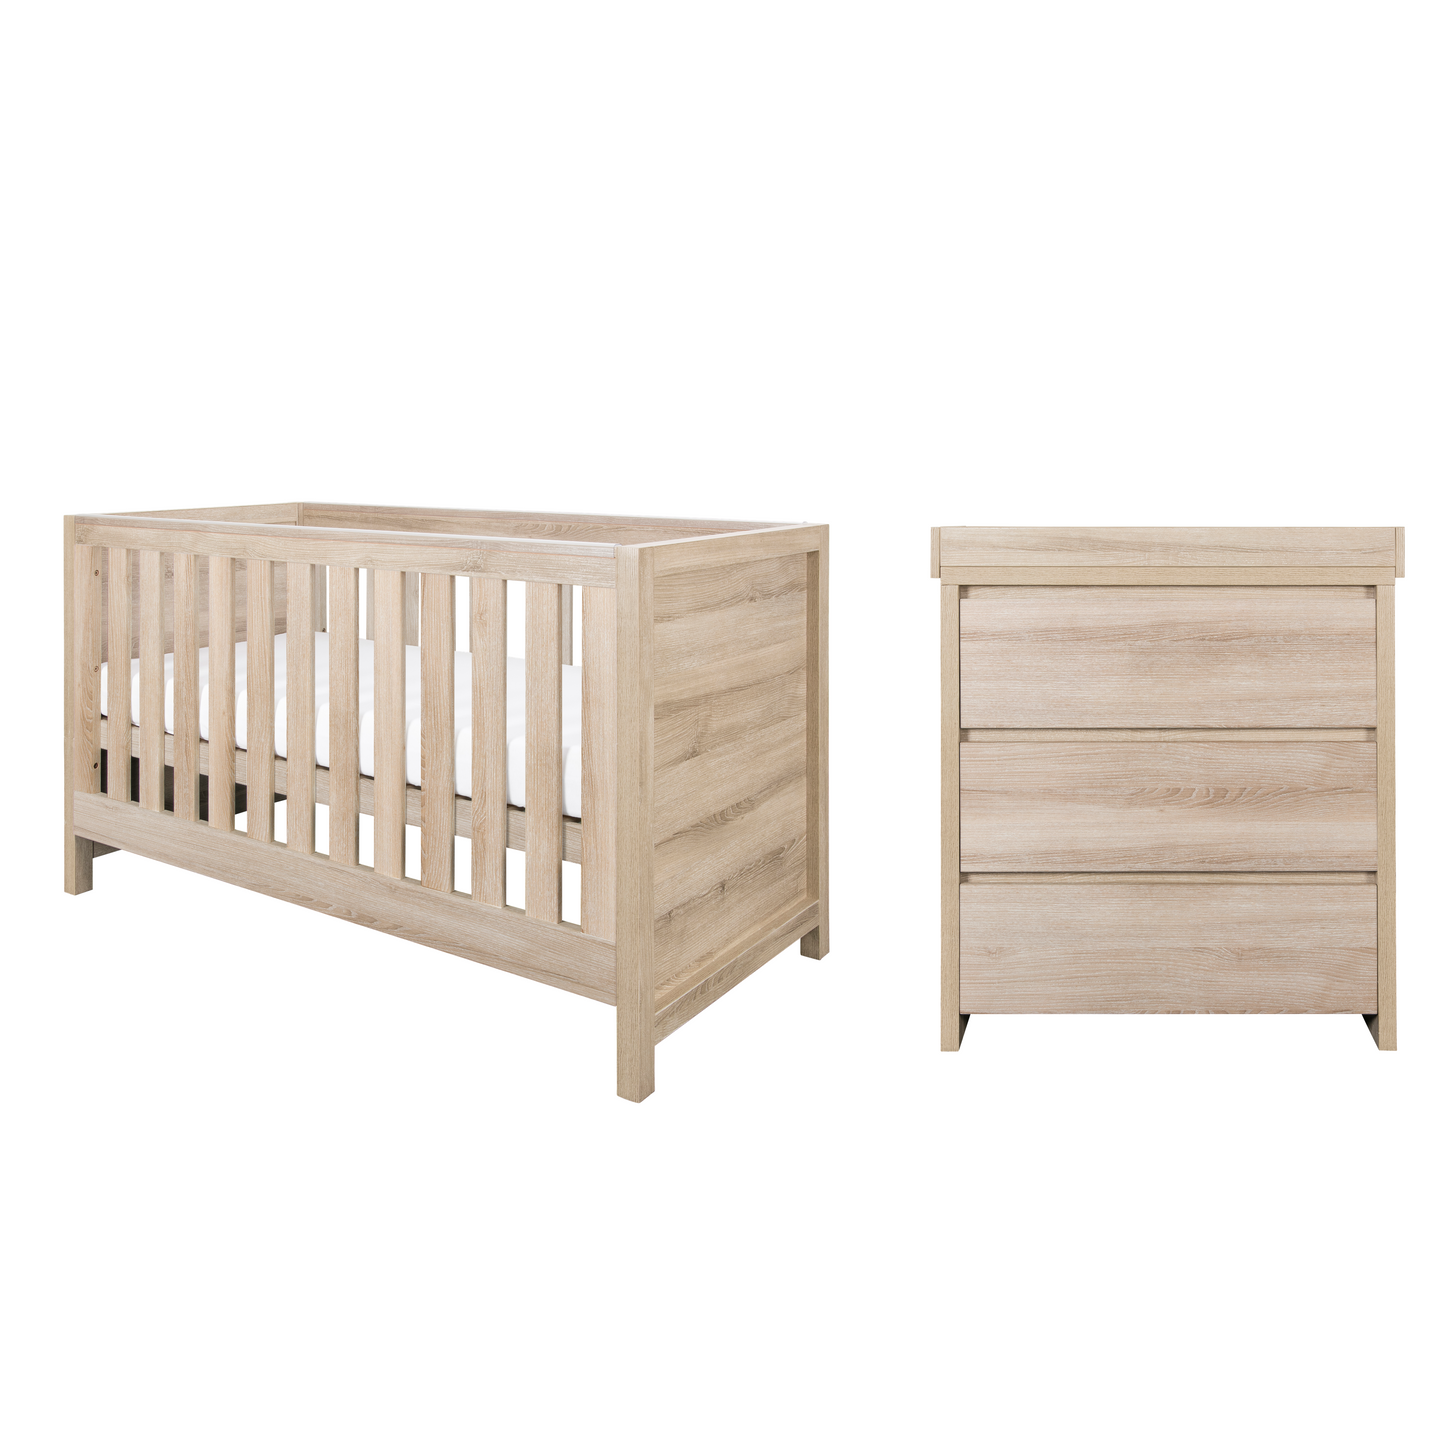 Tutti Bambini Modena 2 Piece Set with Cot Bed and Dresser Changer